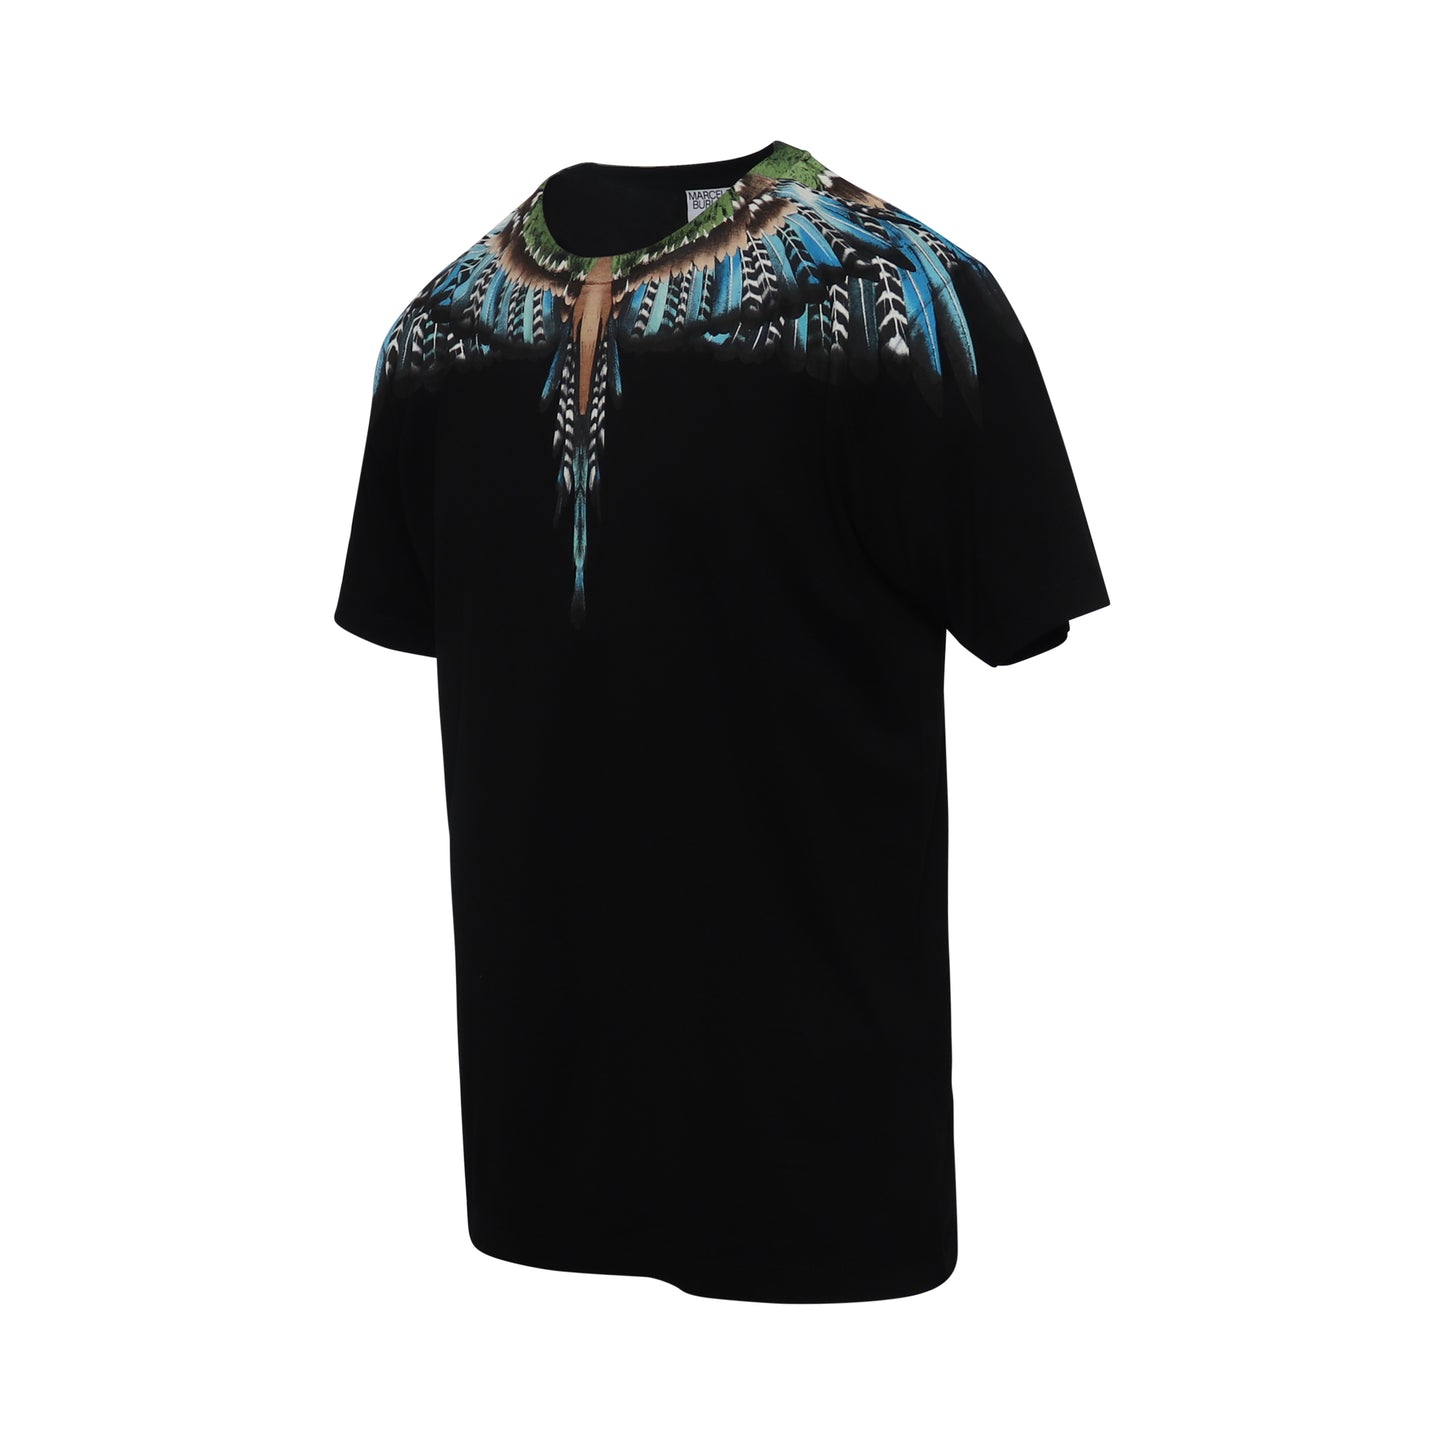 Grizzly Wings Print T-Shirt in Black